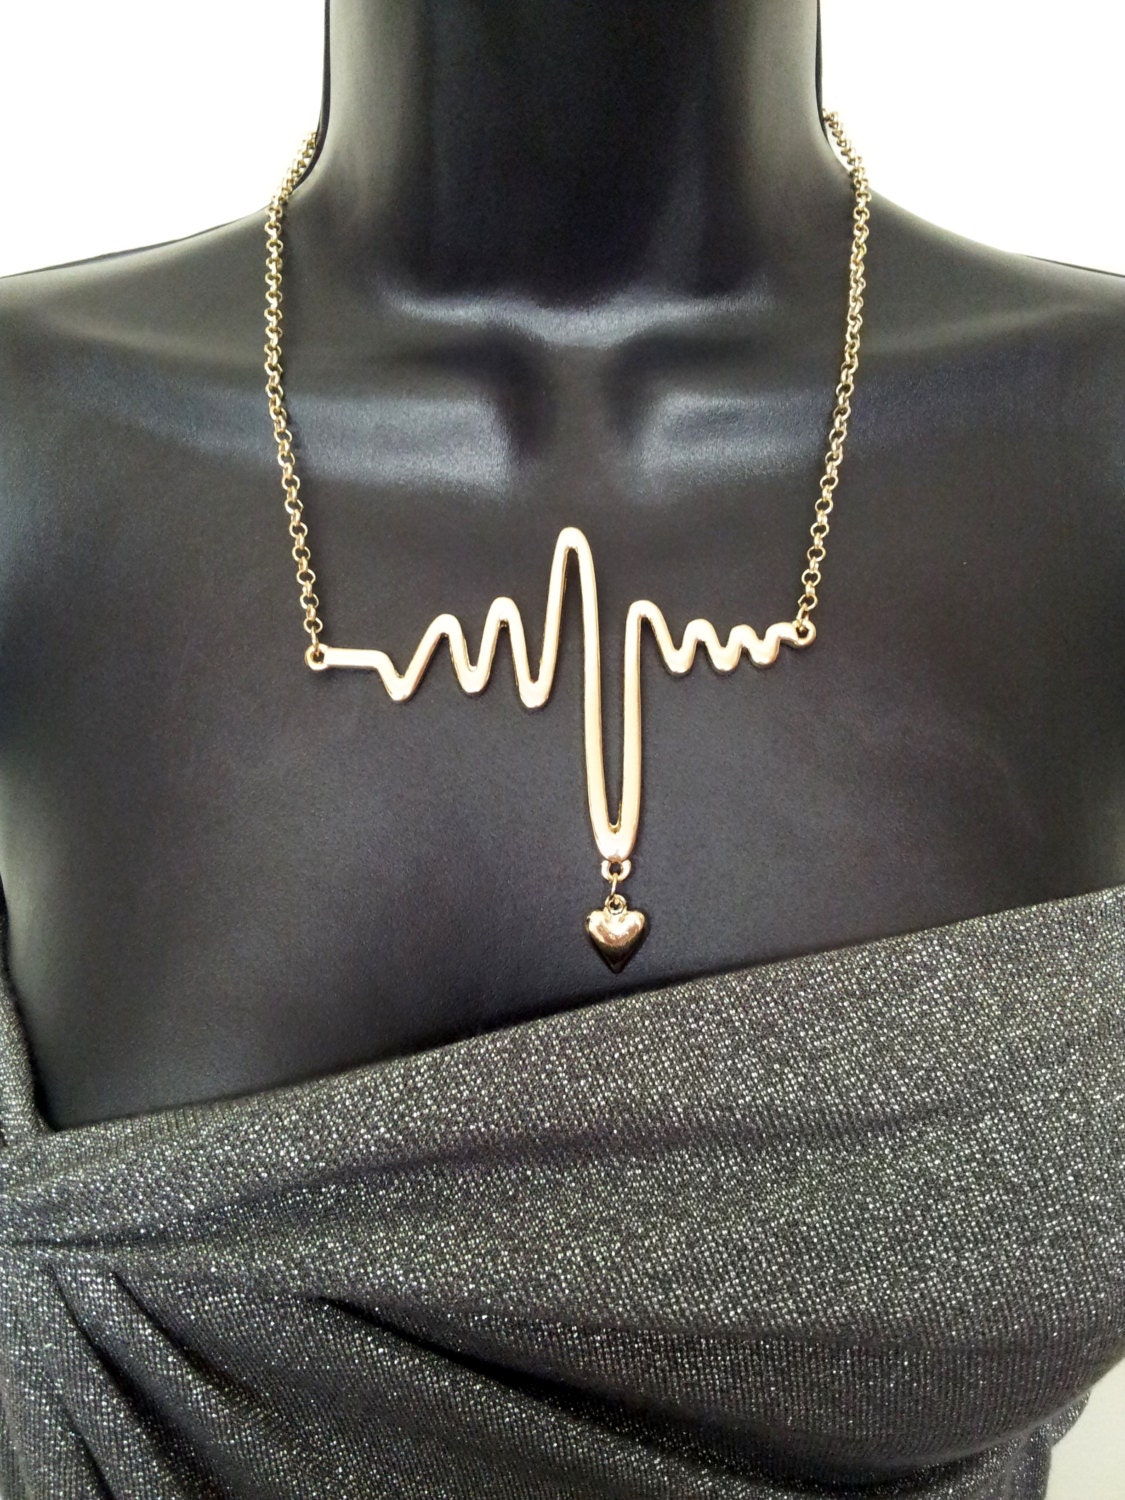 THE LIFELINE Necklace. Gold plated Ekg Doctor Nurse by OWhyDontYou